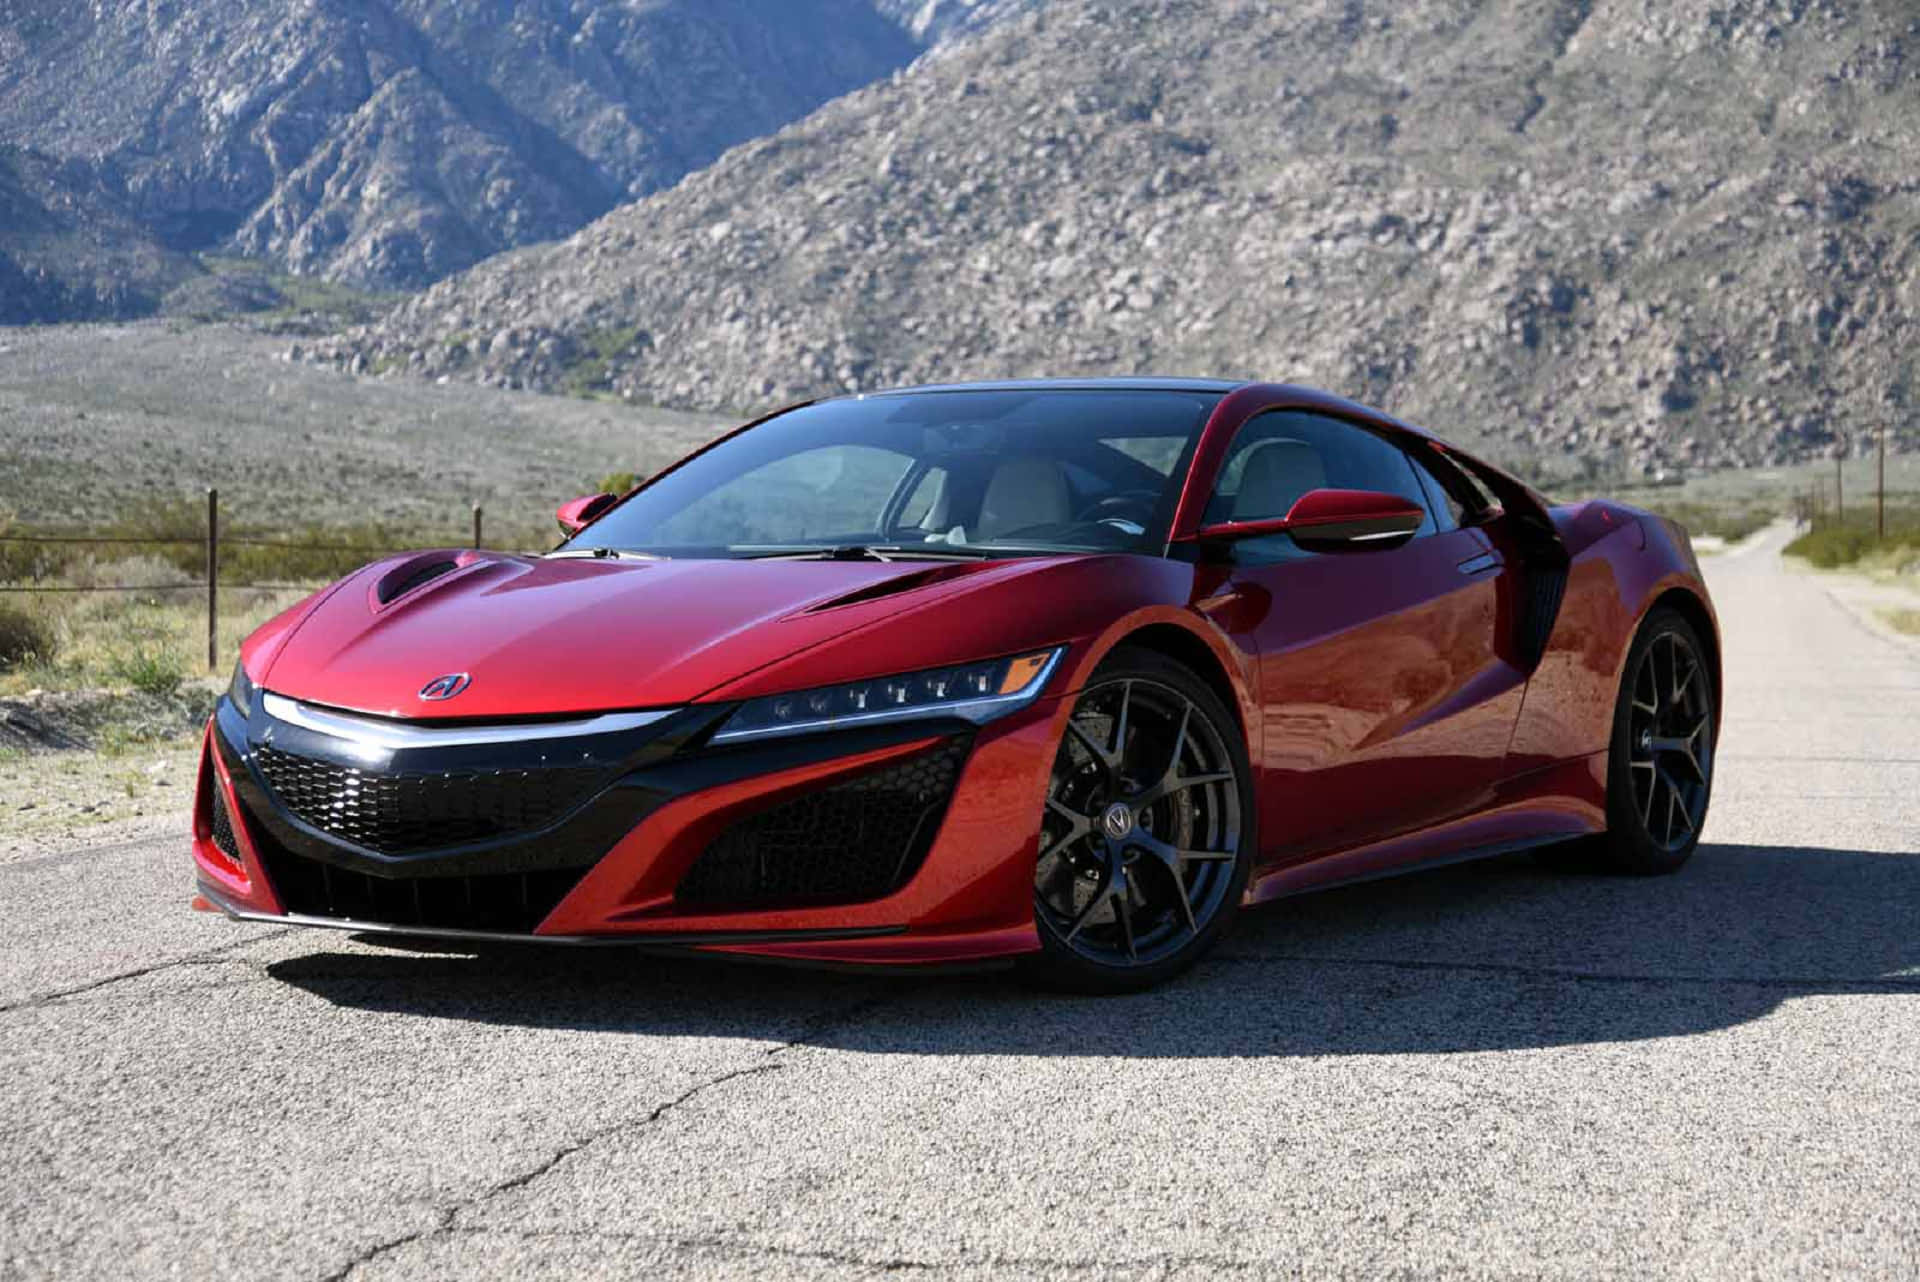 Feel the power of the Acura NSX